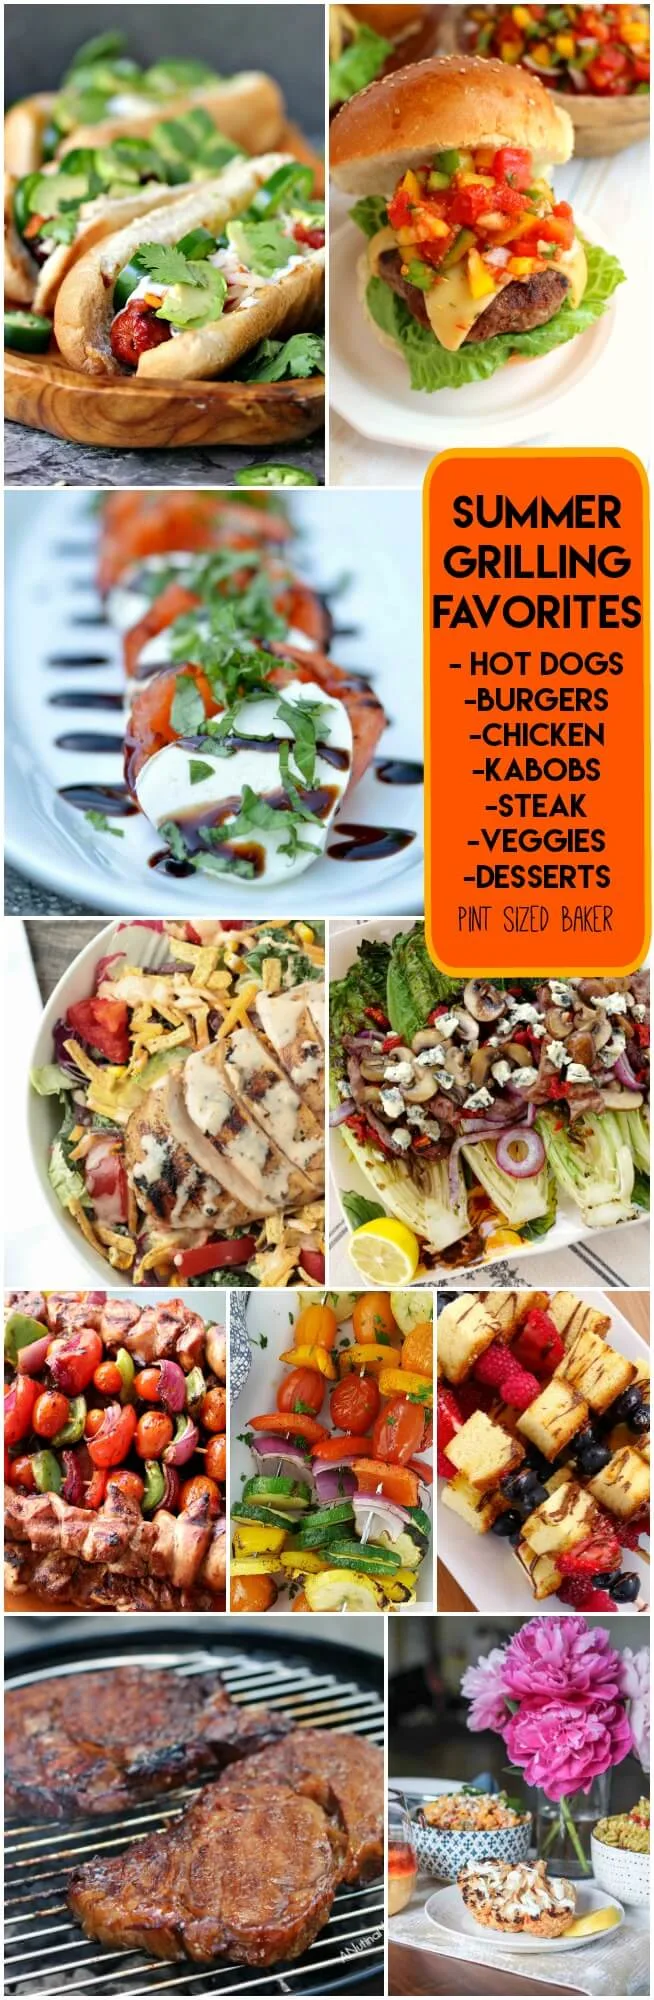 Summer Grilling Favorites! Ten great recipes you can make on the grill. Hot Dogs, Burgers, Veggies, Chicken and even dessert!